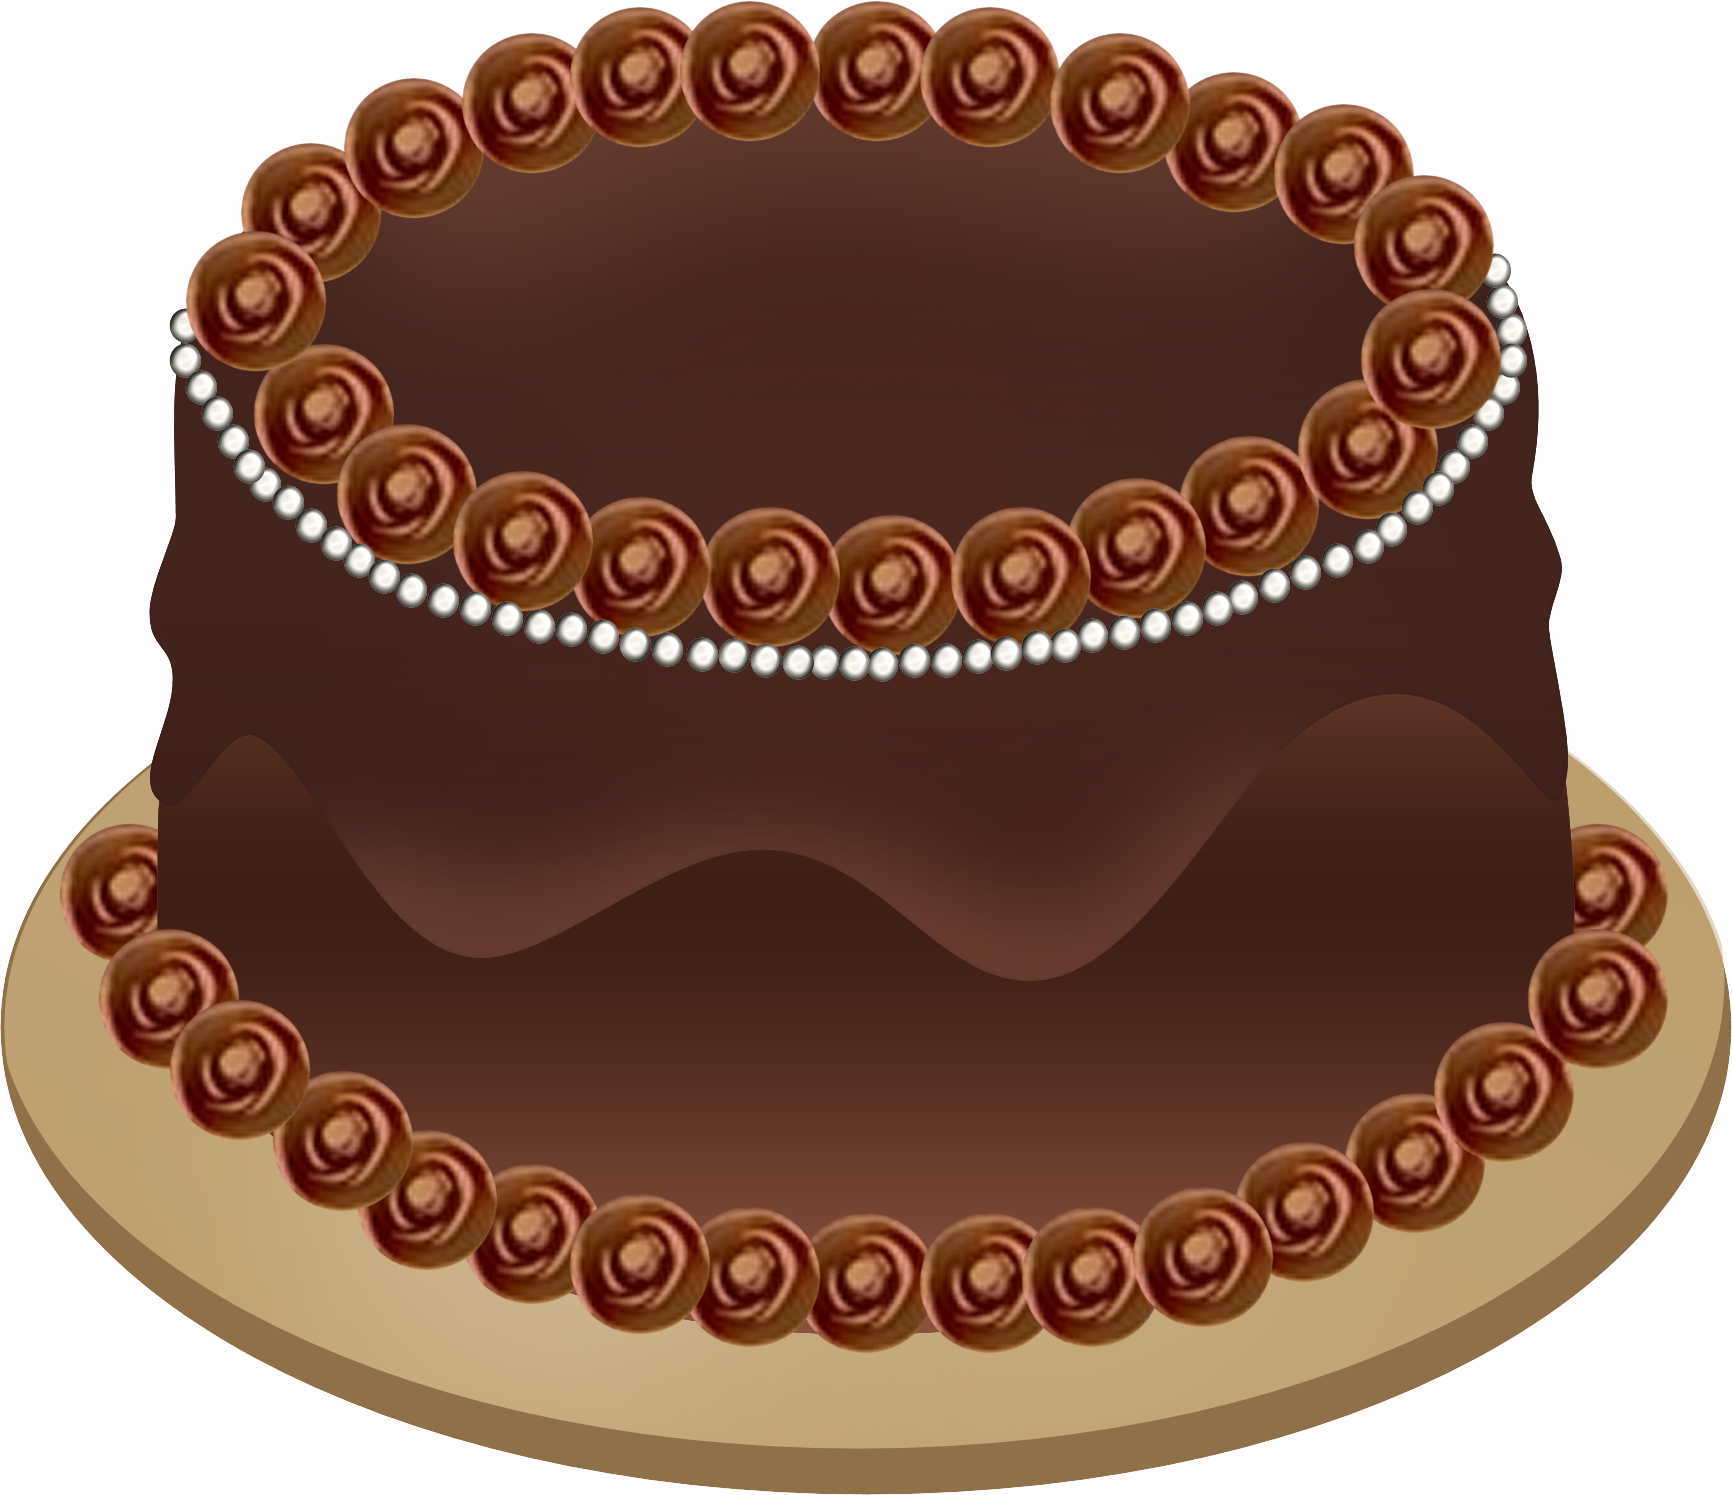 Chocolate Pastry Cake PNG Image for Free Download